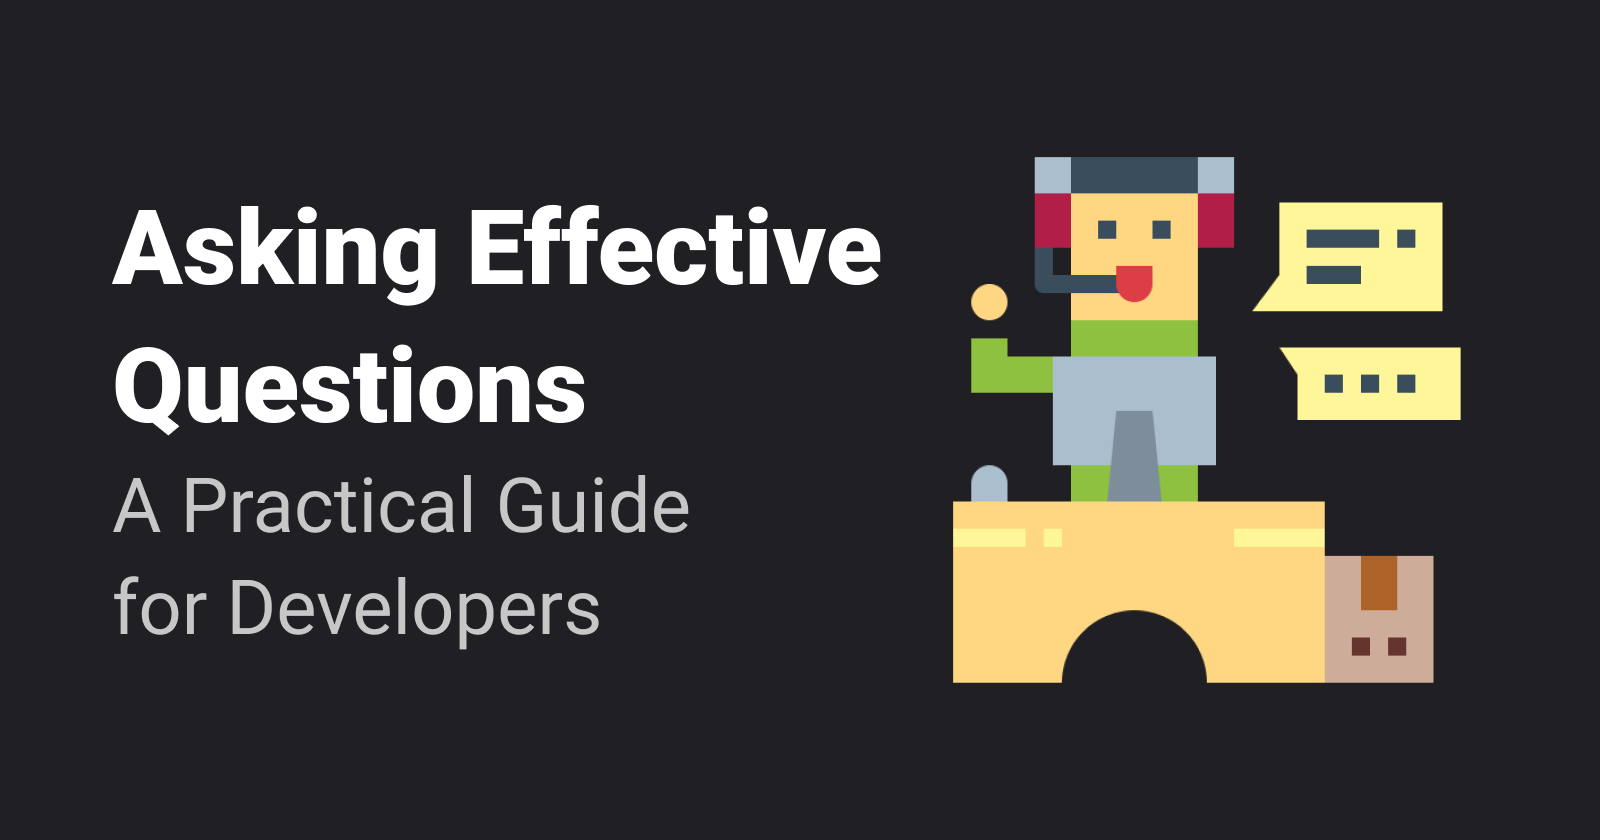 How to Ask Effective Questions: A Practical Guide for Developers